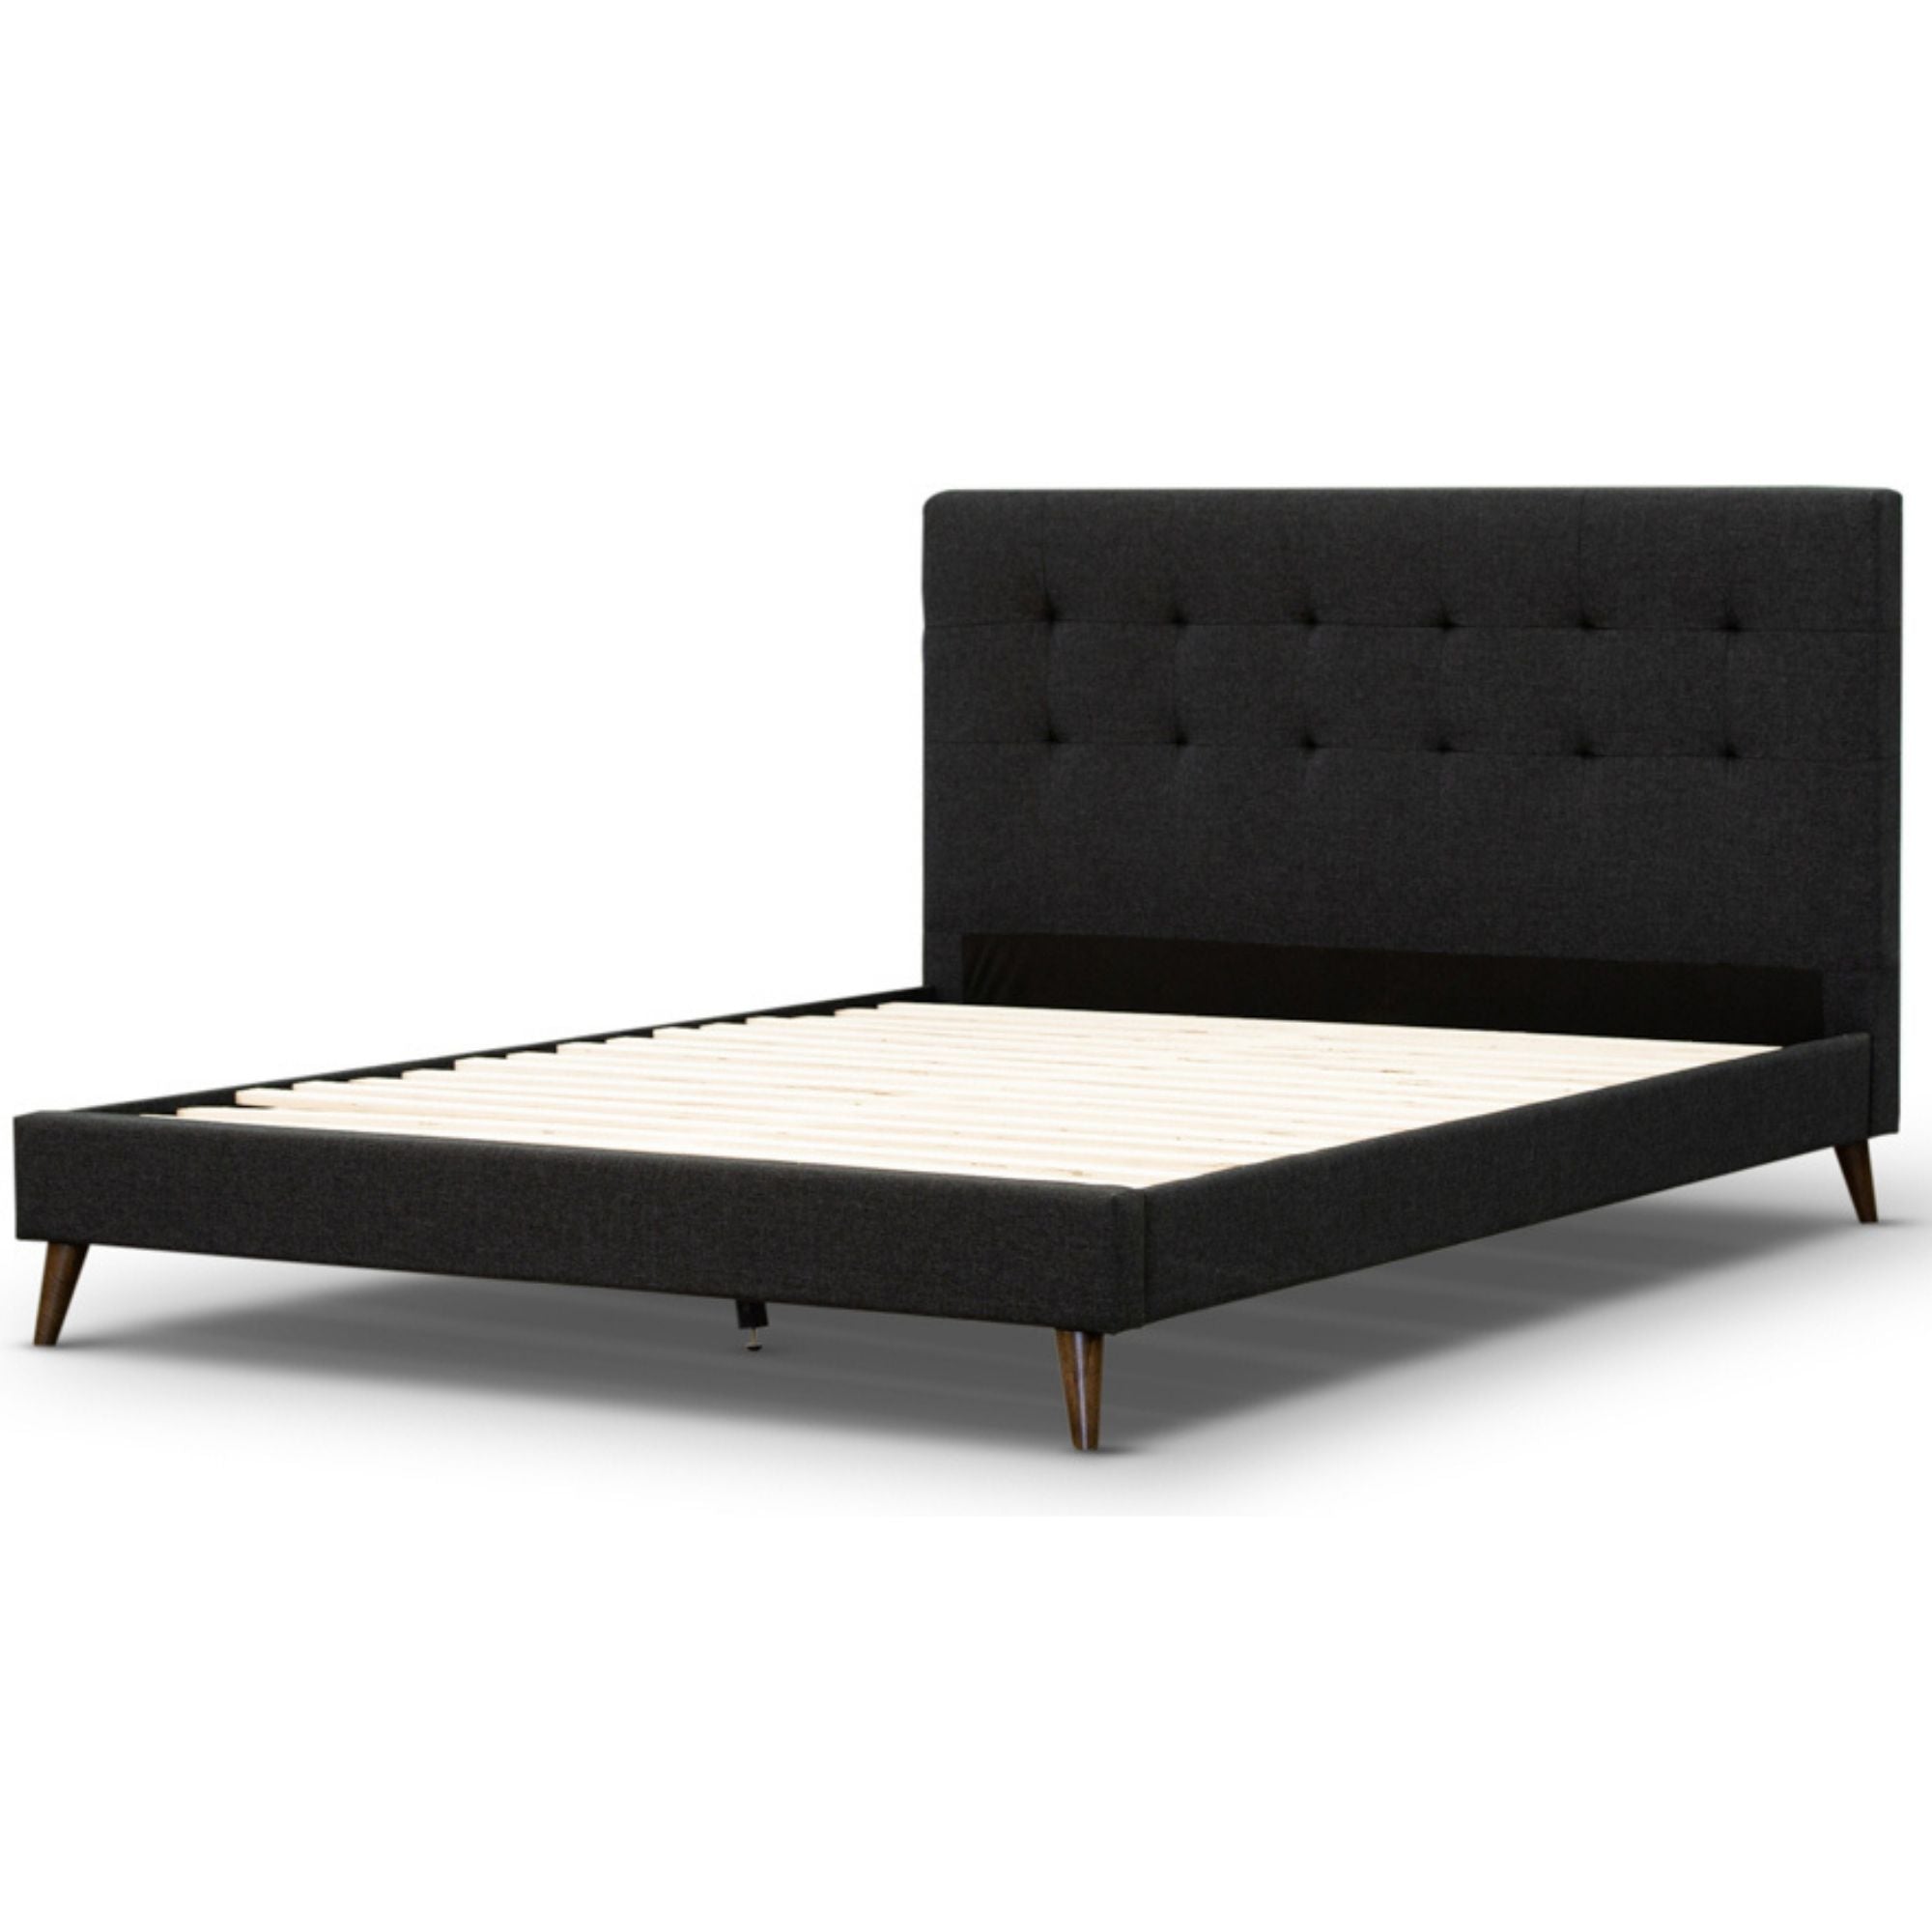 Charcoal Queen Bed: Stylish Fabric Upholstered Platform Frame for Optimal Comfort